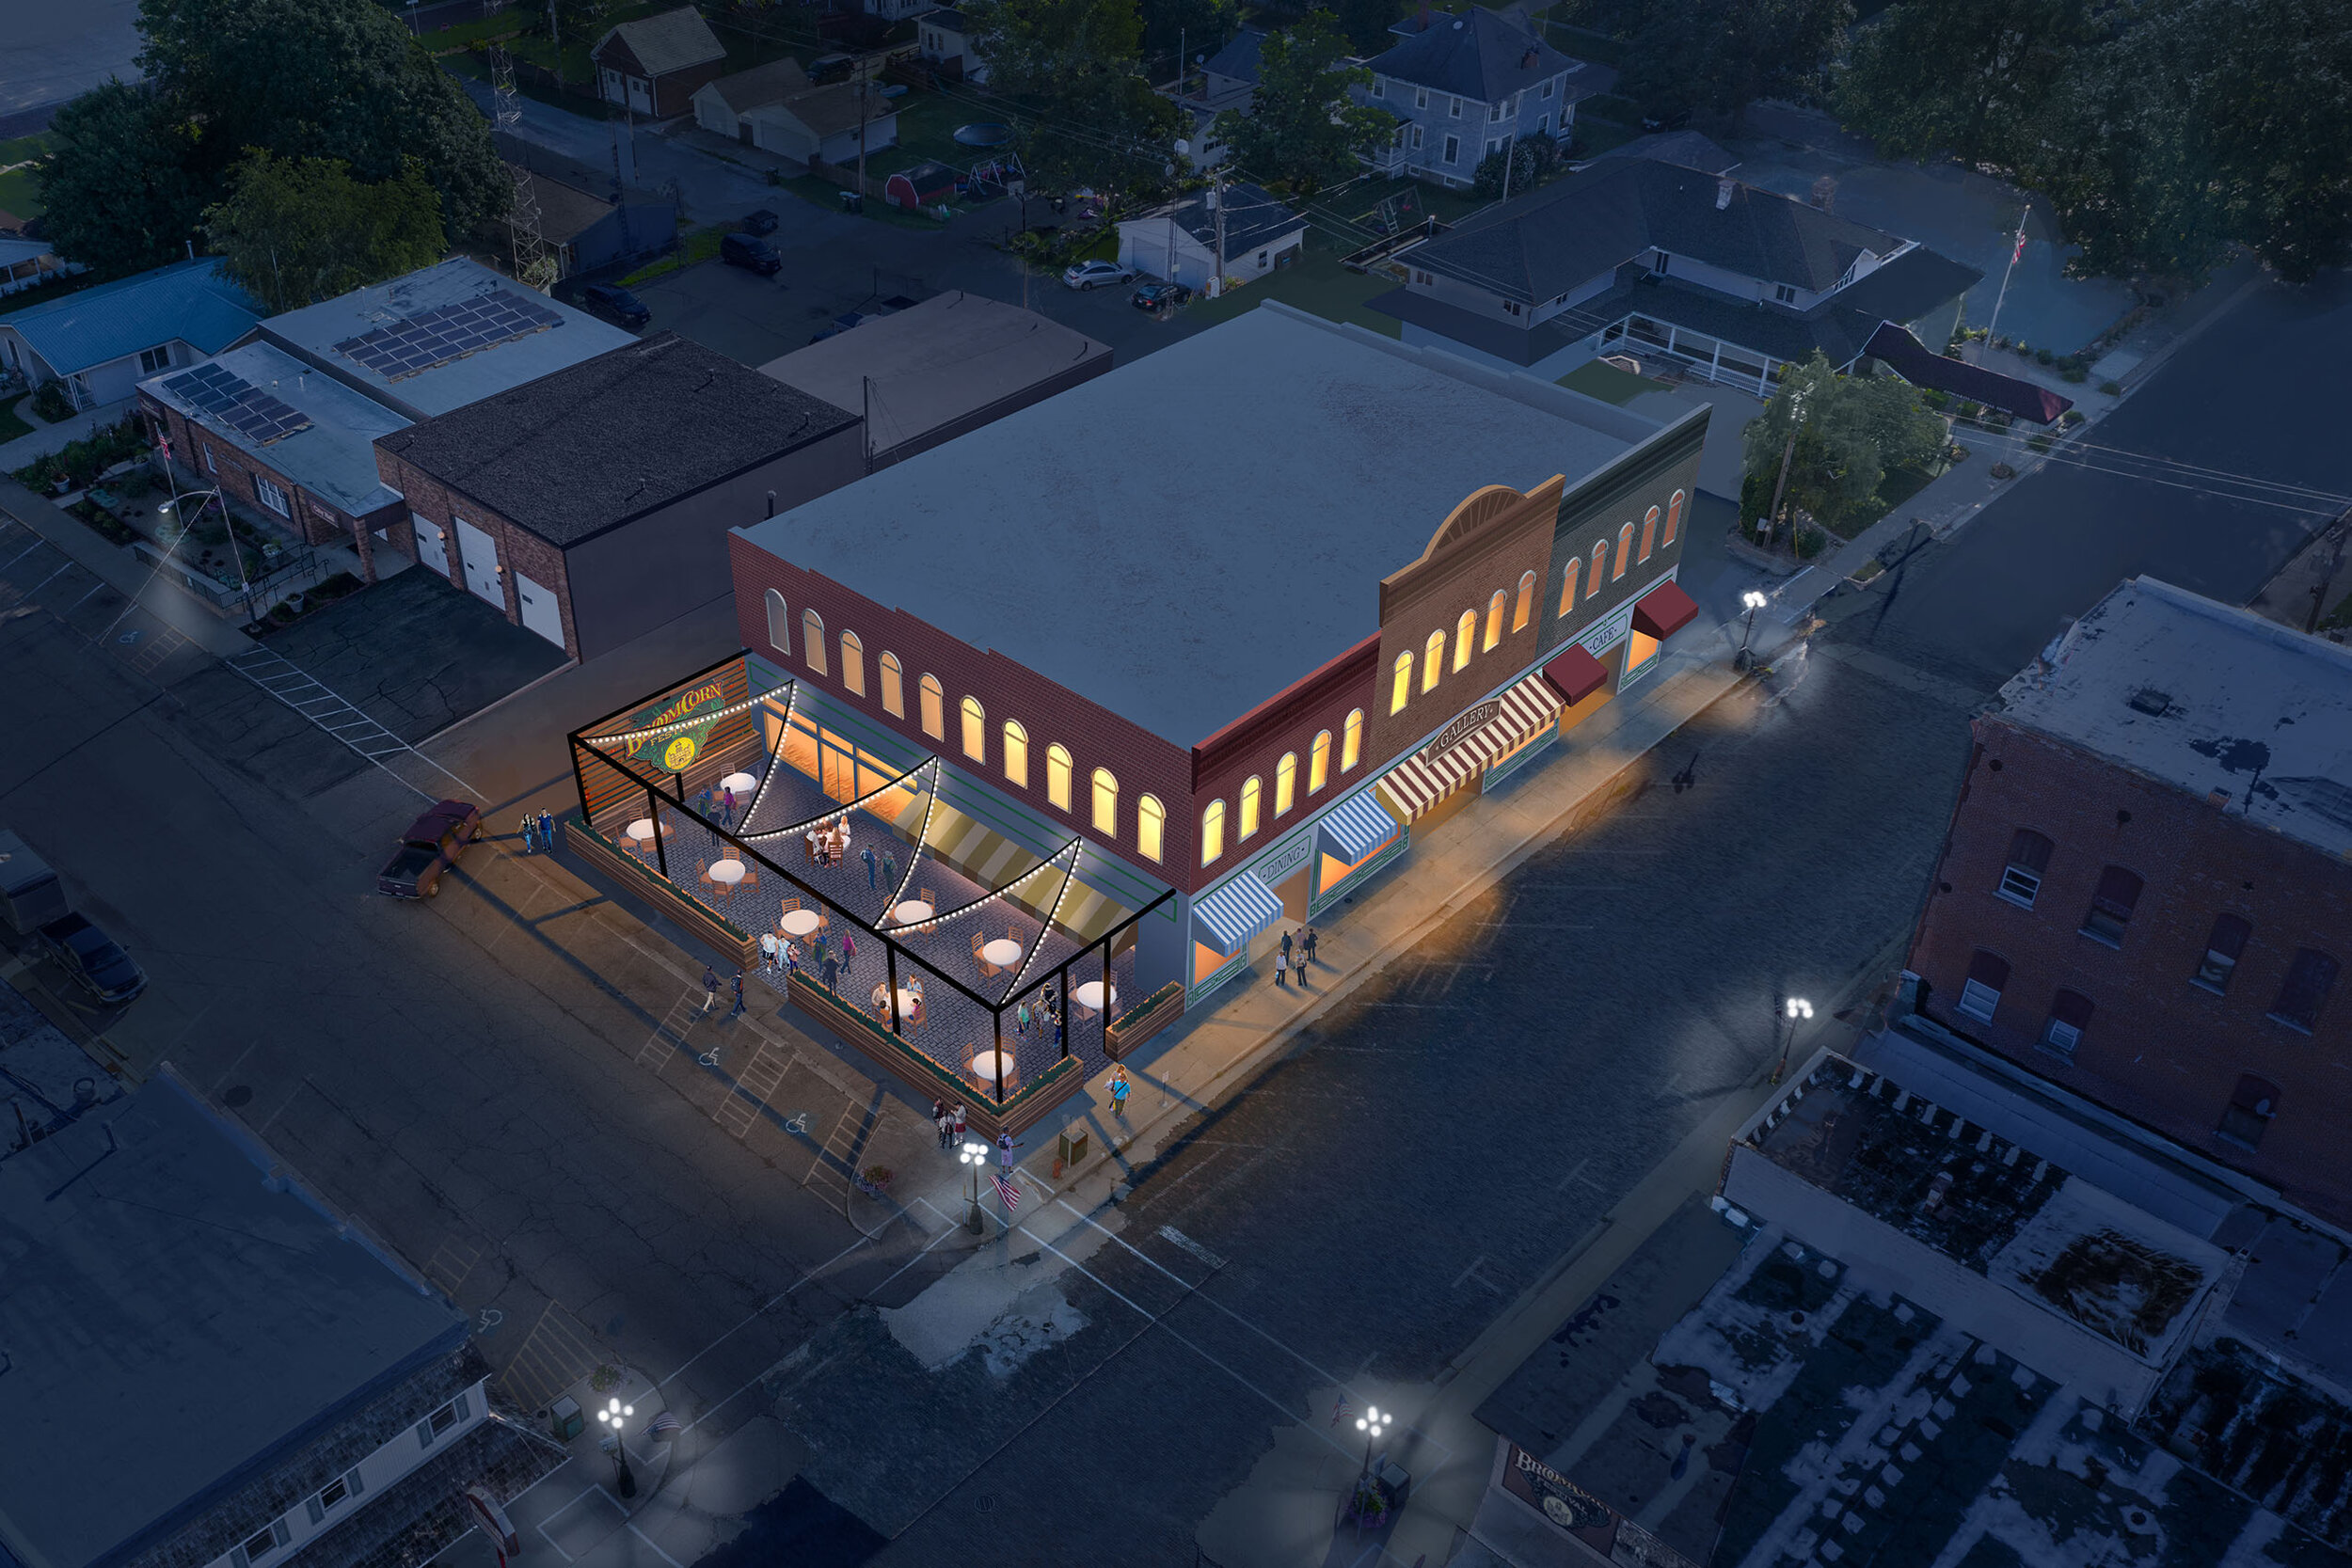 Arcola Downtown Planning